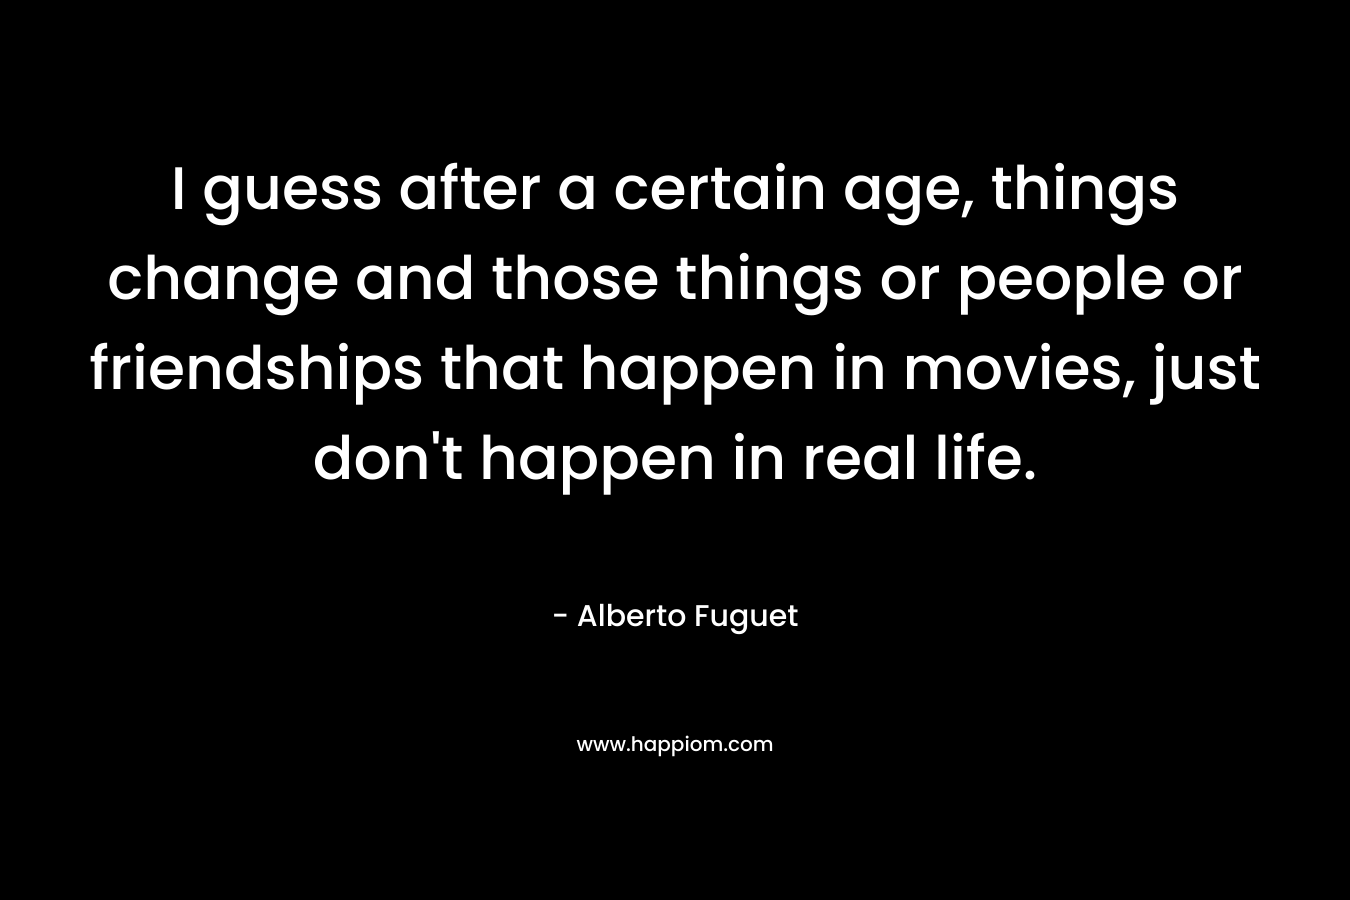 I guess after a certain age, things change and those things or people or friendships that happen in movies, just don’t happen in real life. – Alberto Fuguet